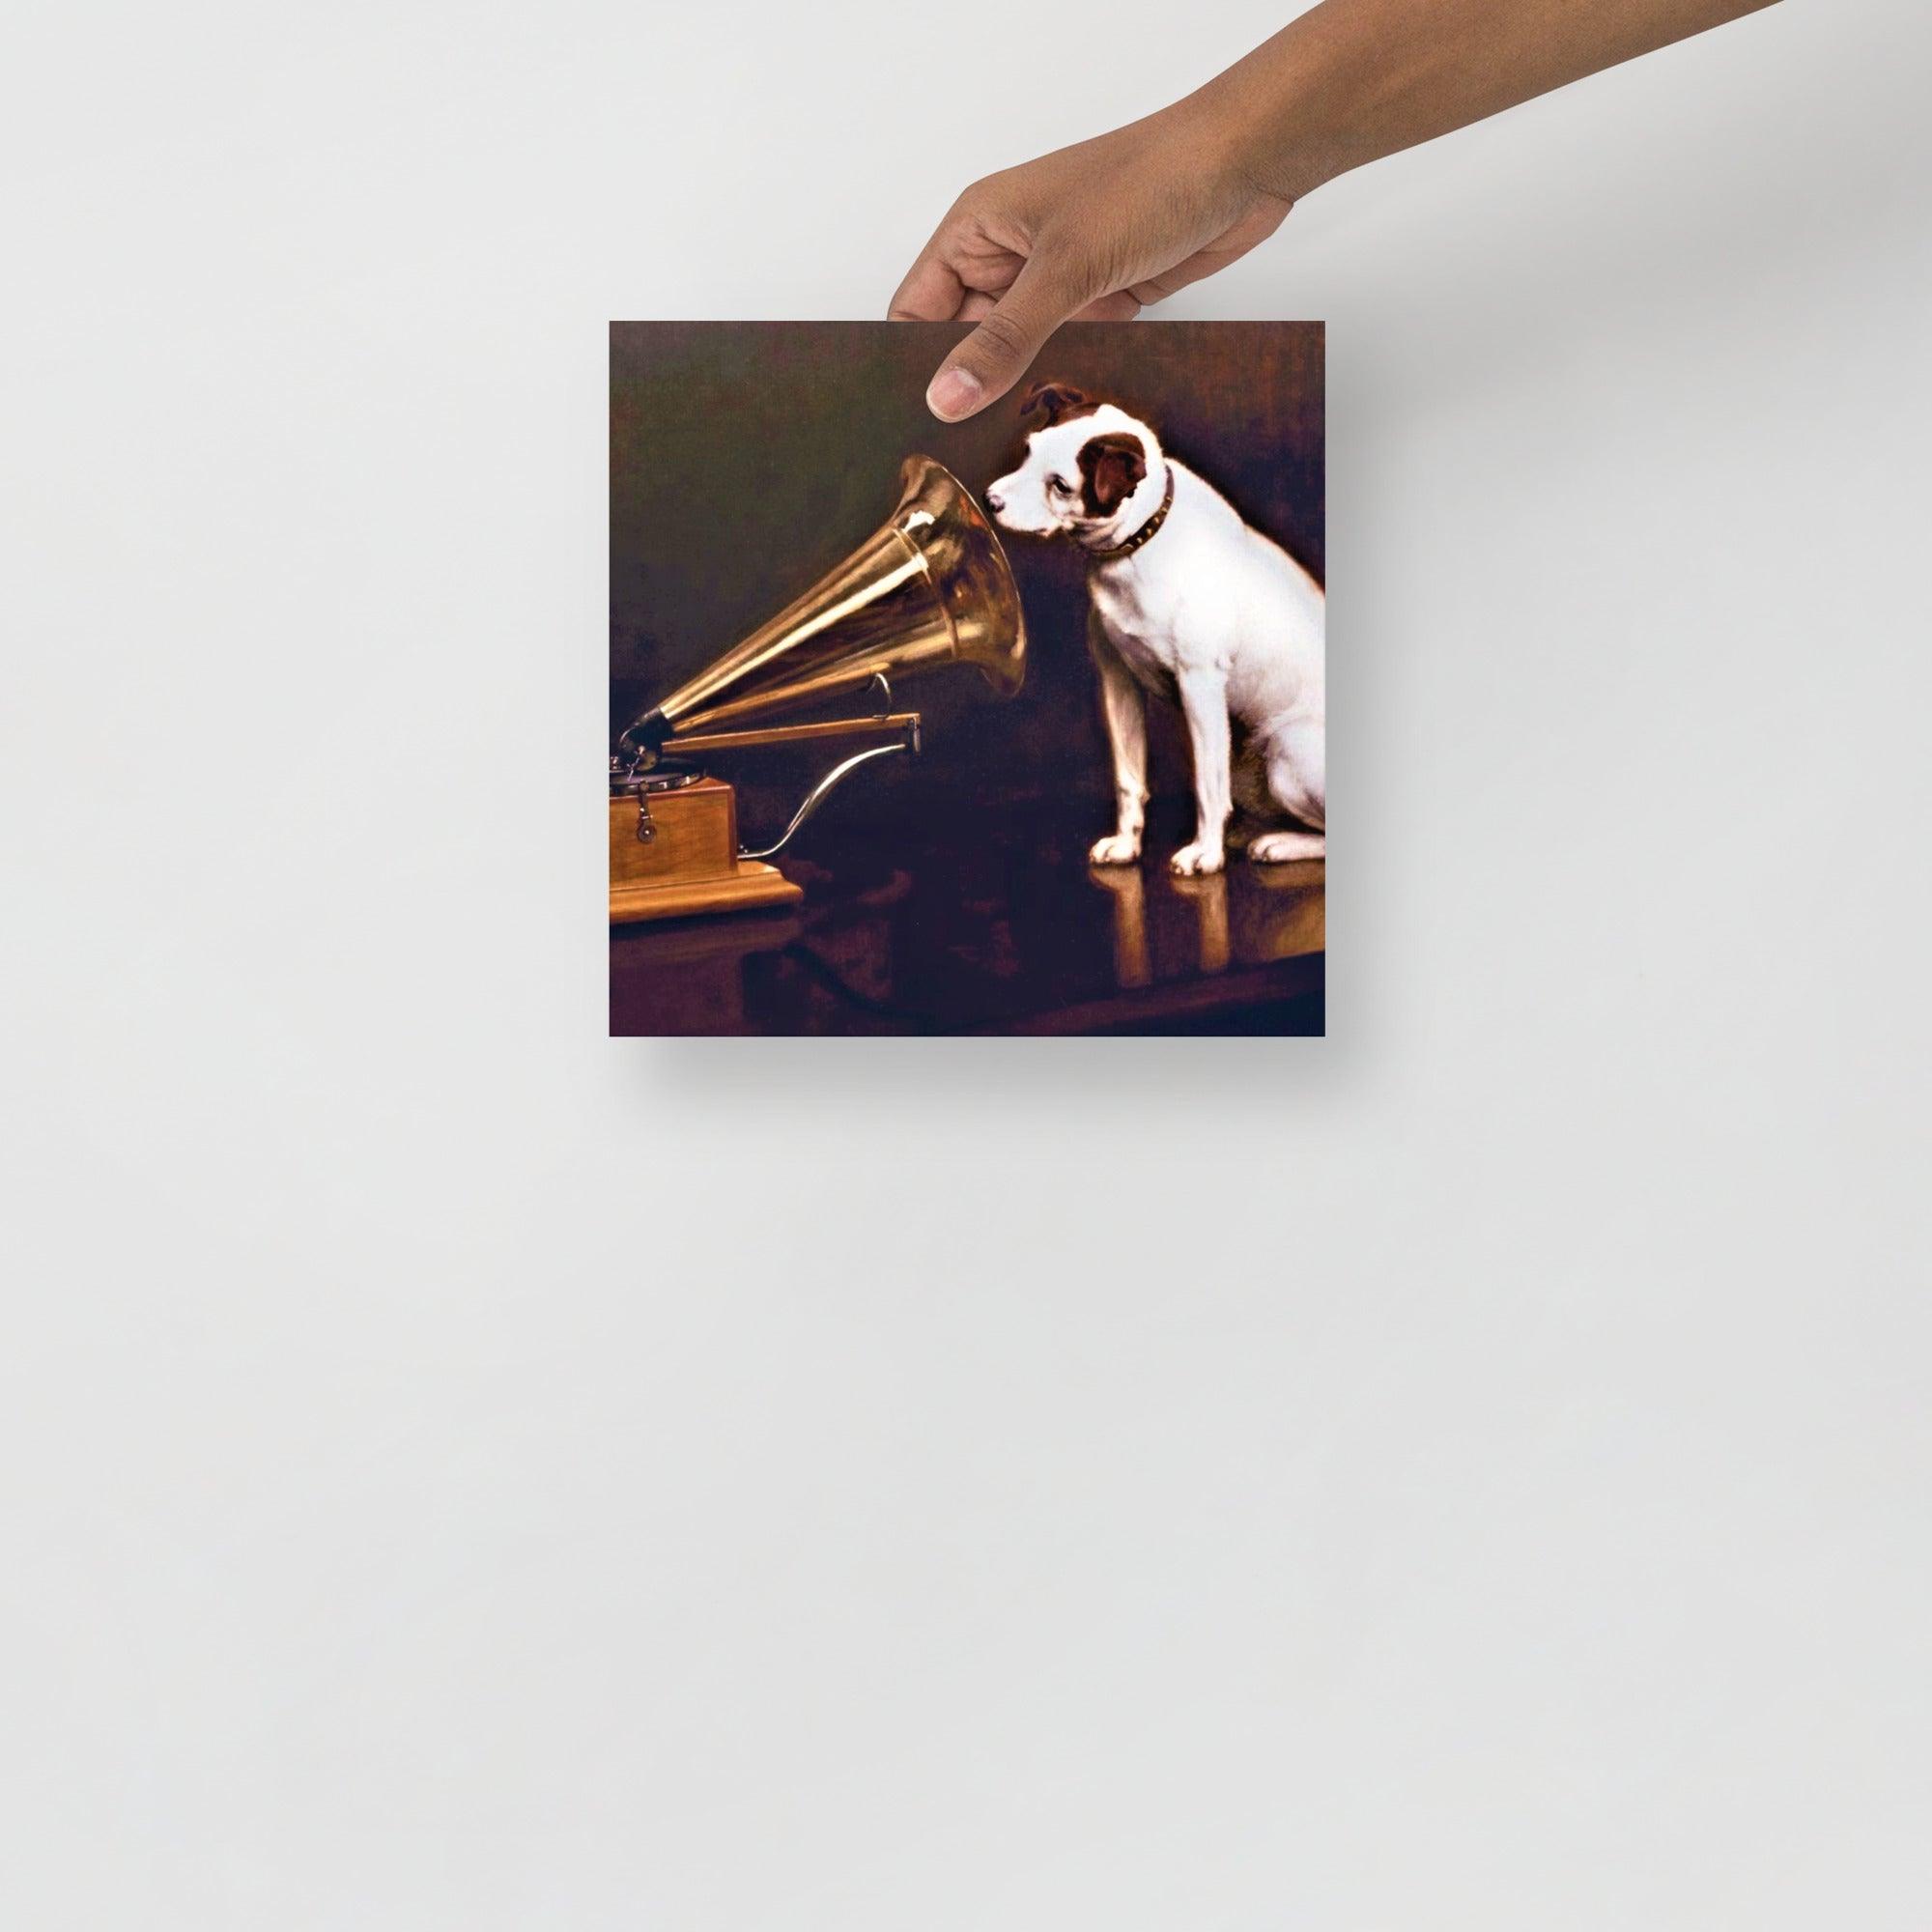 A His Master's Voice By Francis Barraud poster on a plain backdrop in size 10x10”.